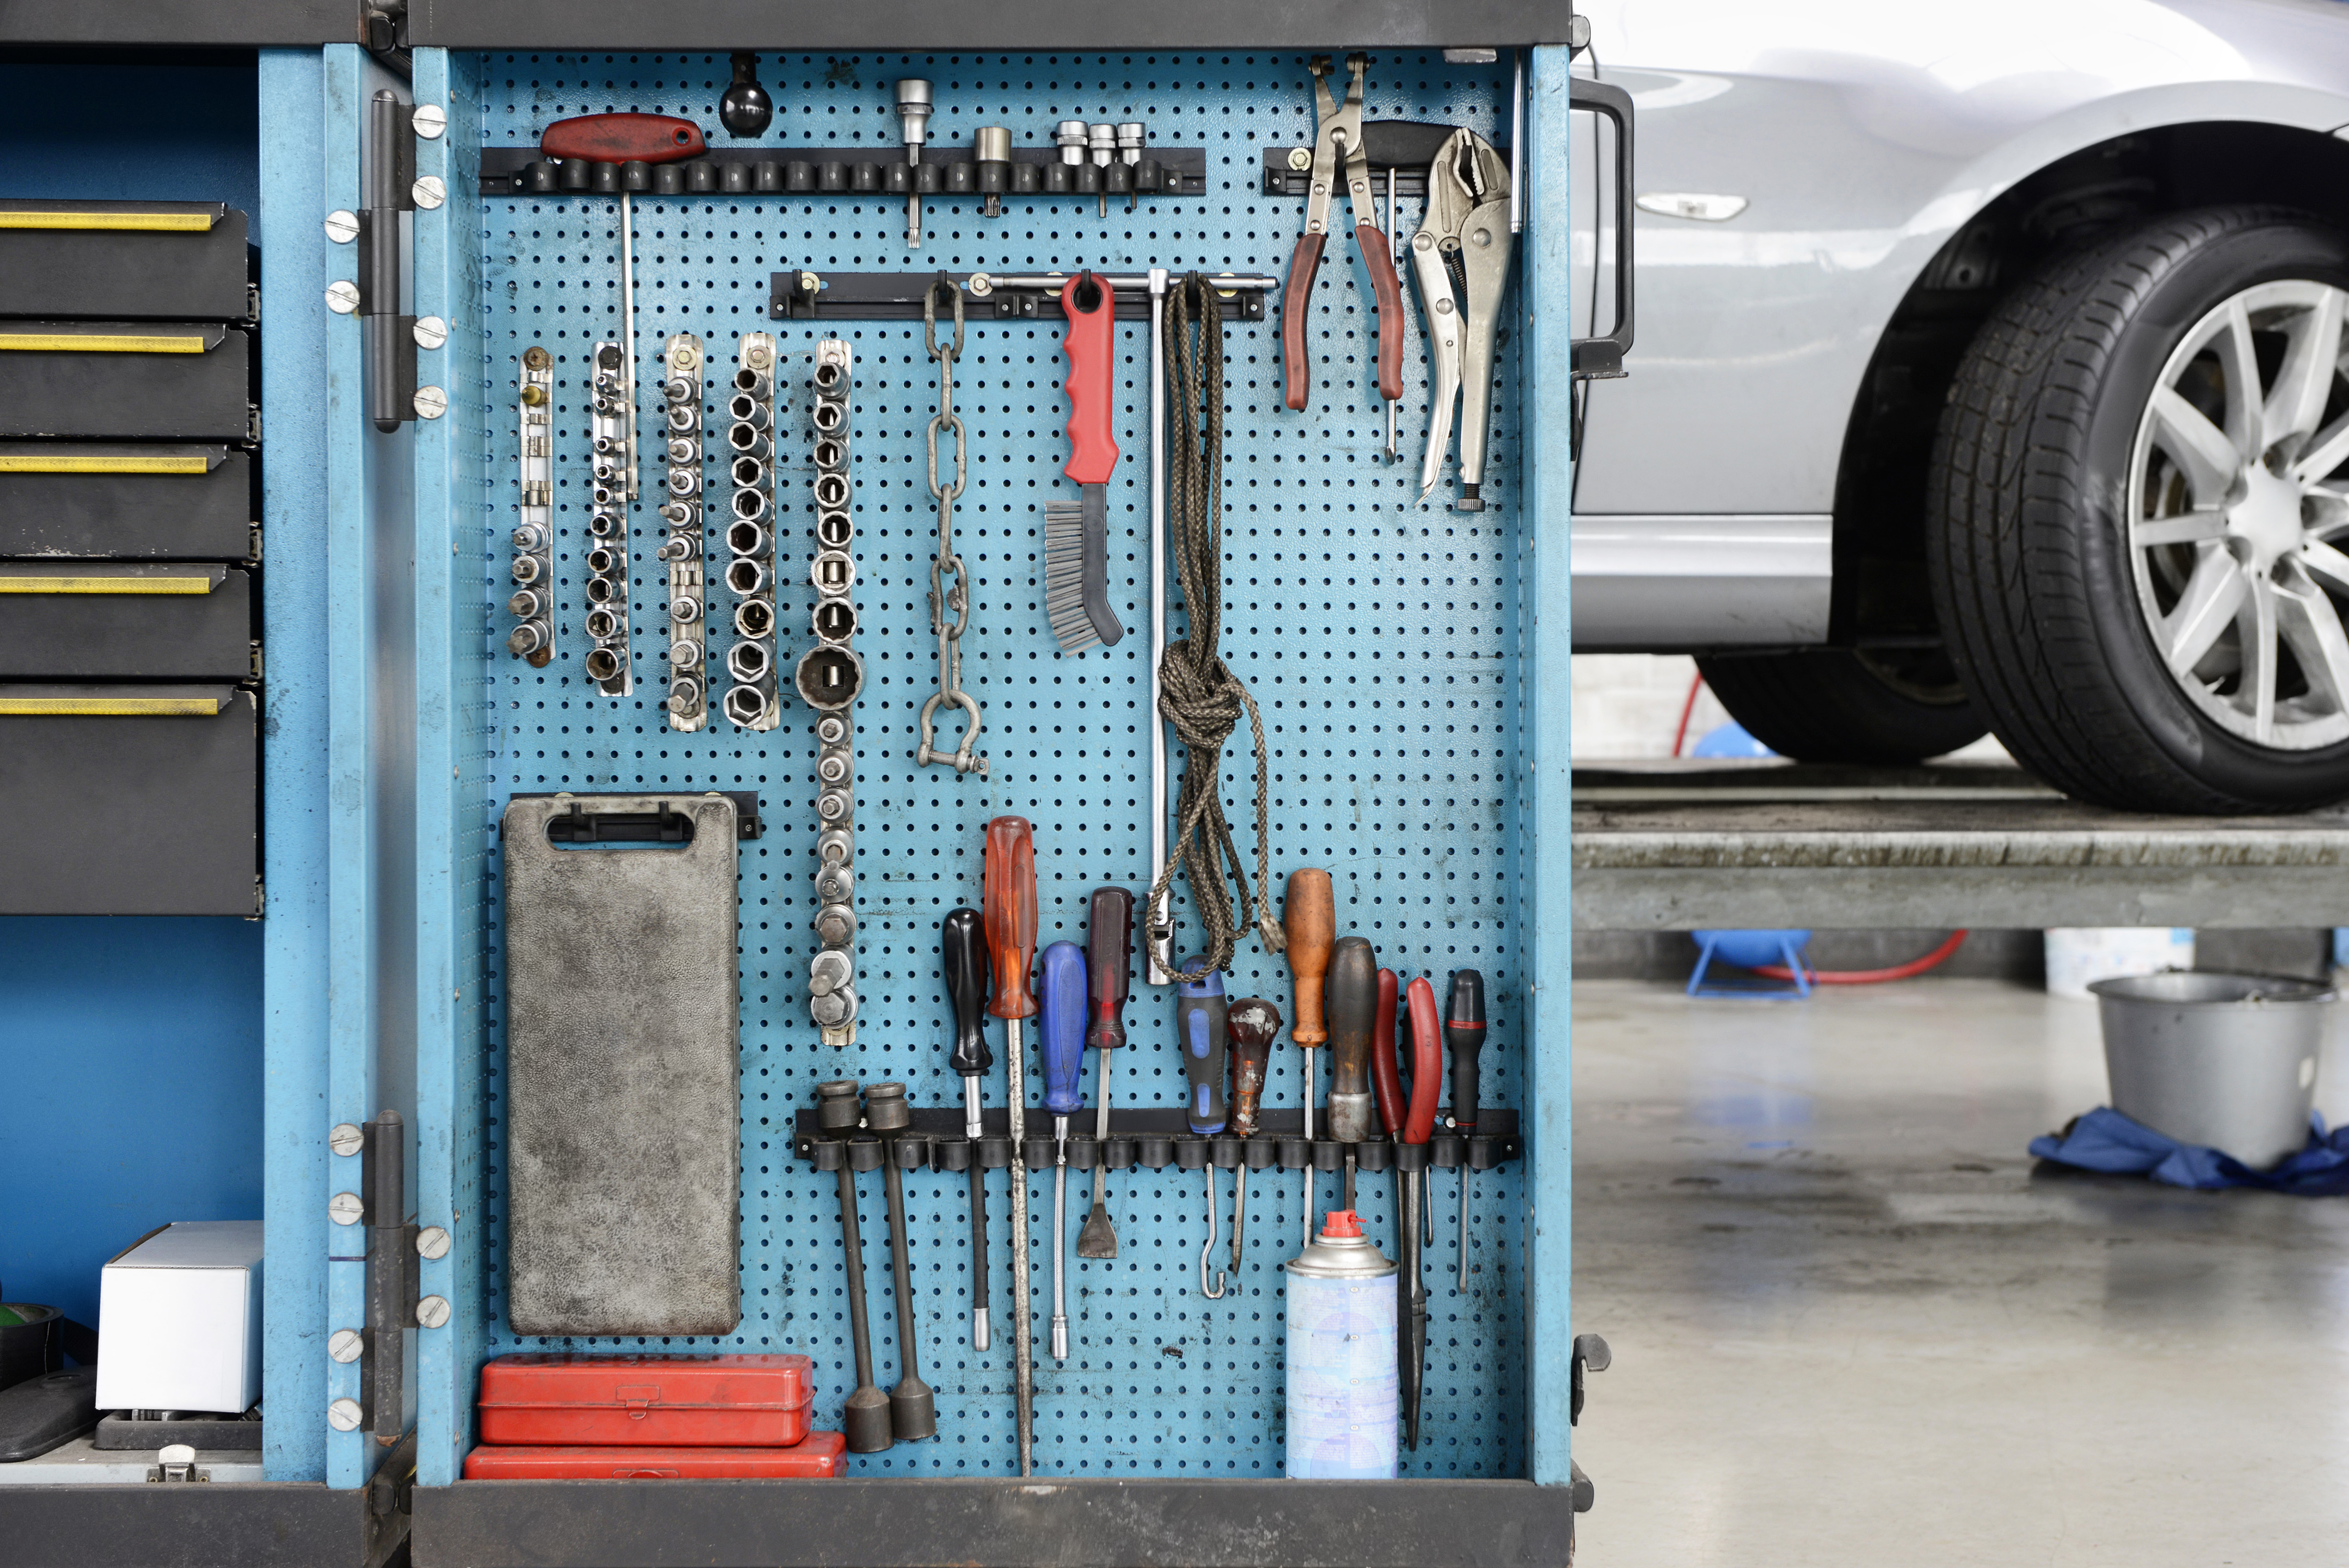 Tools on a blue board in a storage cabinet,organised in rows,at an auto repair shop.